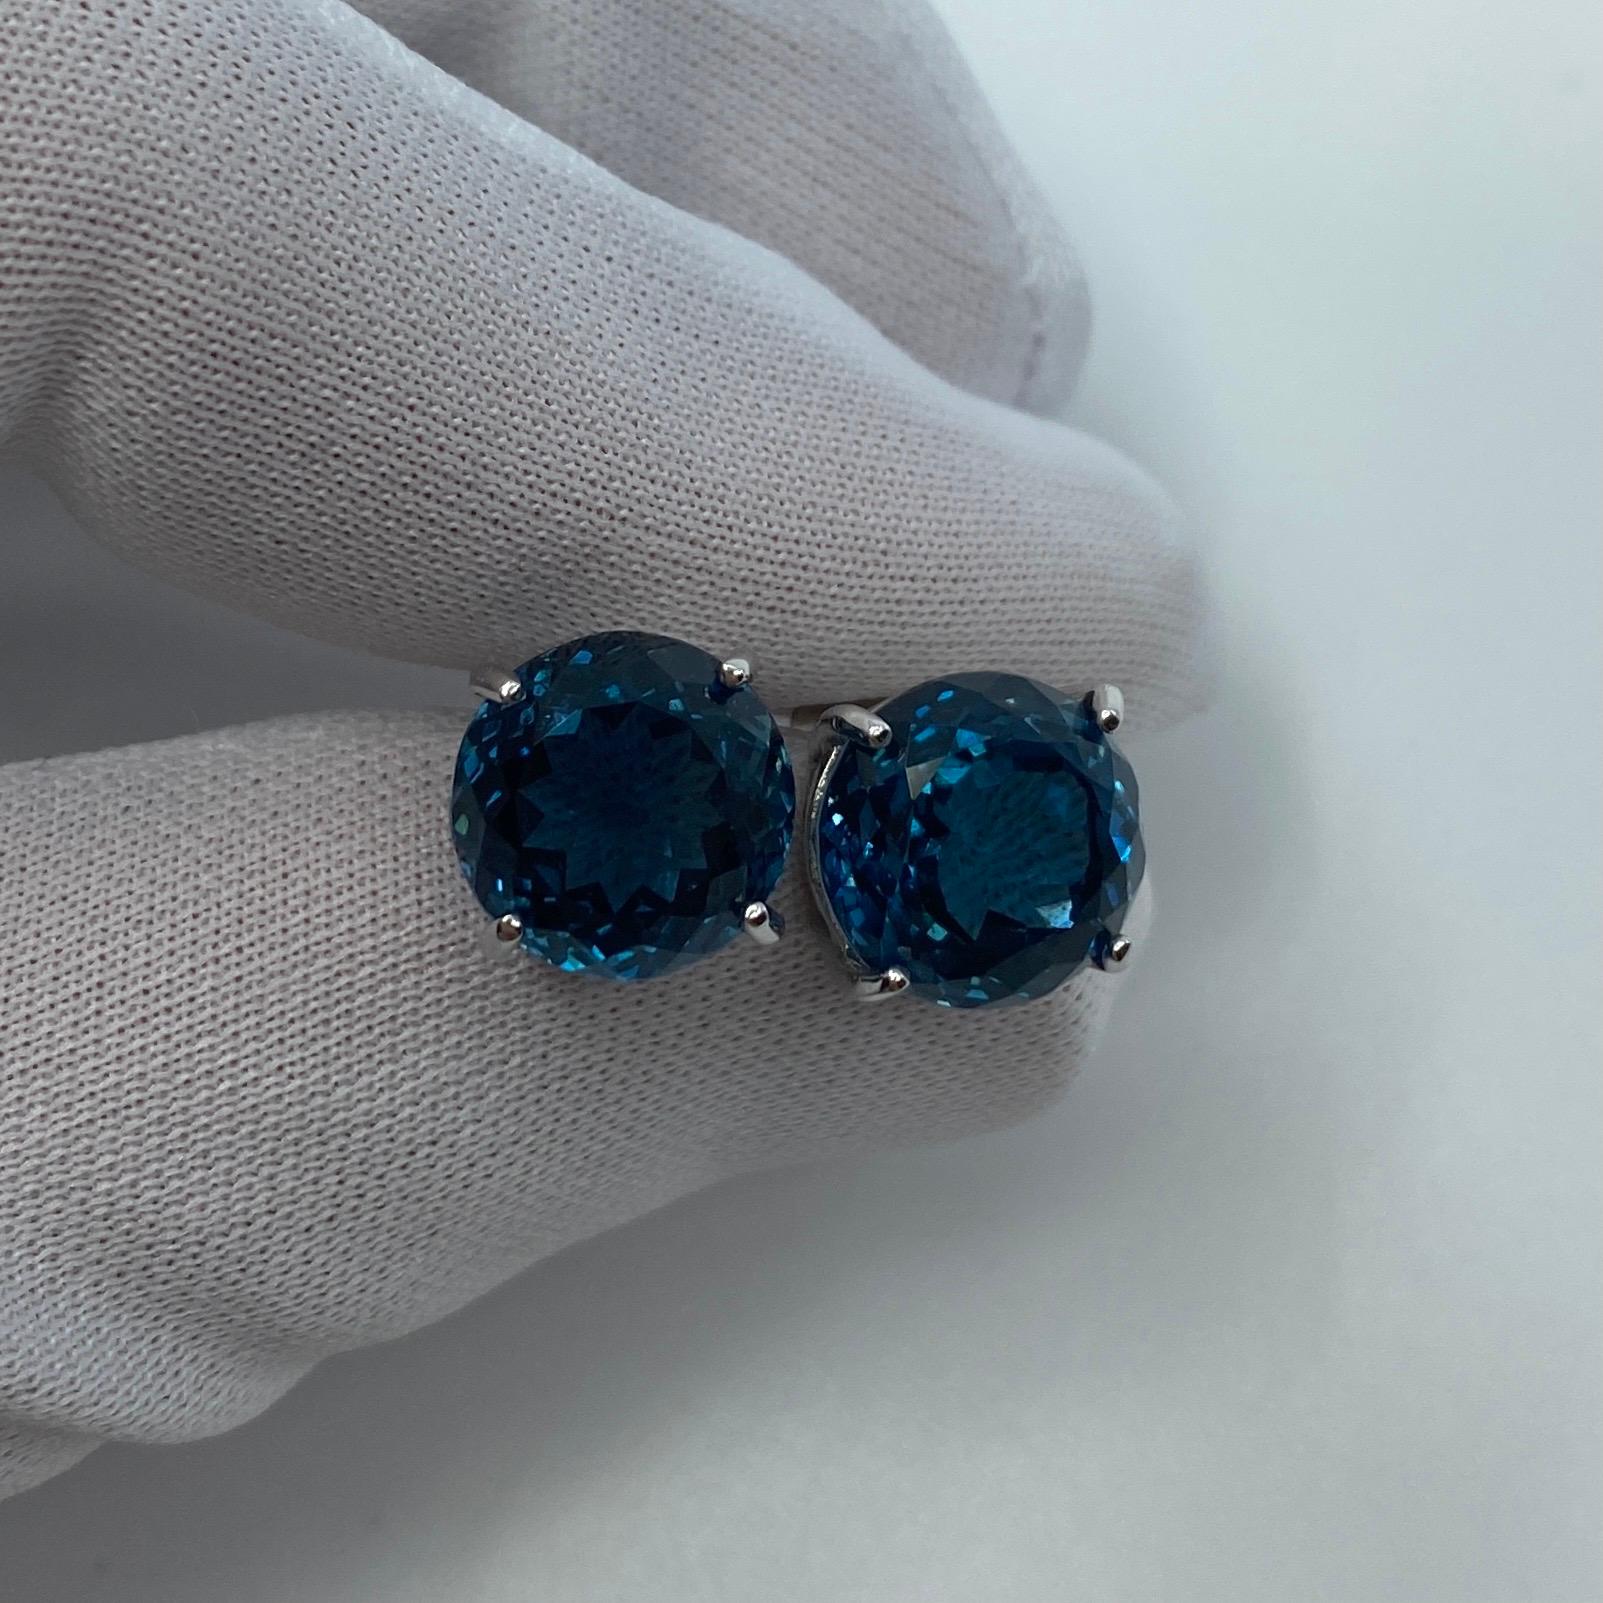 Large 15.60ct Fine London Blue Topaz Round Cut 18k White Gold Earring Studs For Sale 7